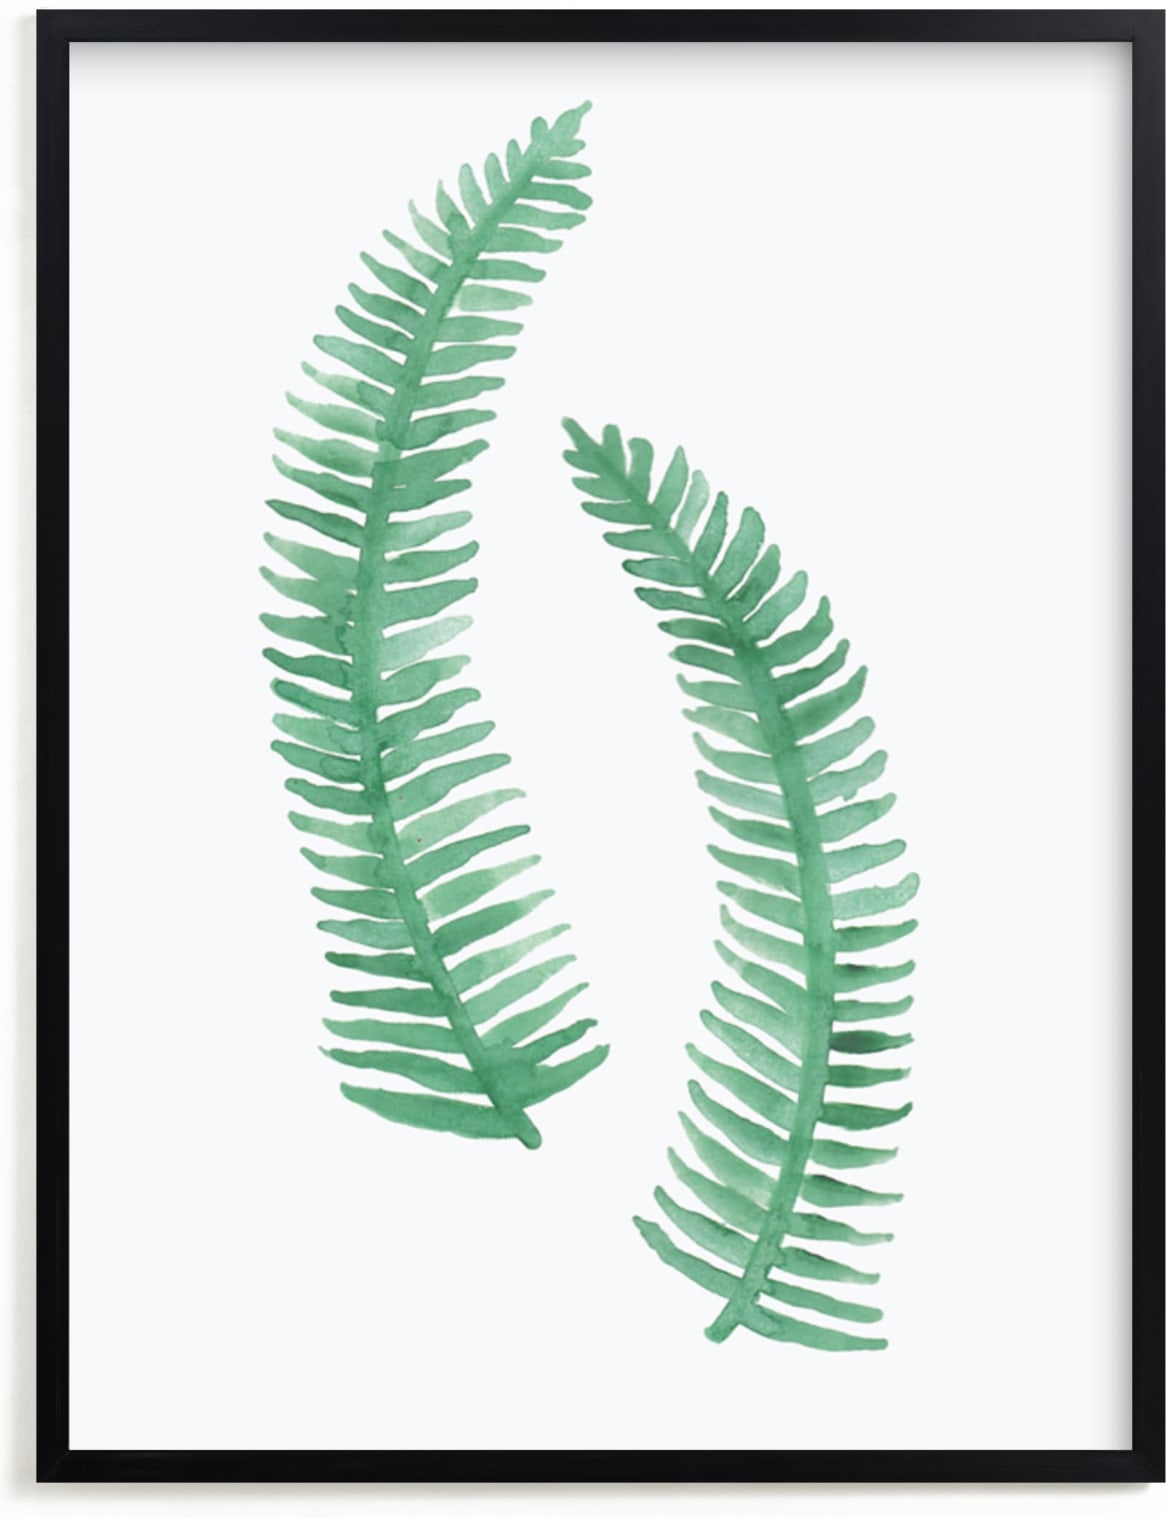 This is a white art by Katharine Watson called Painted Ferns.